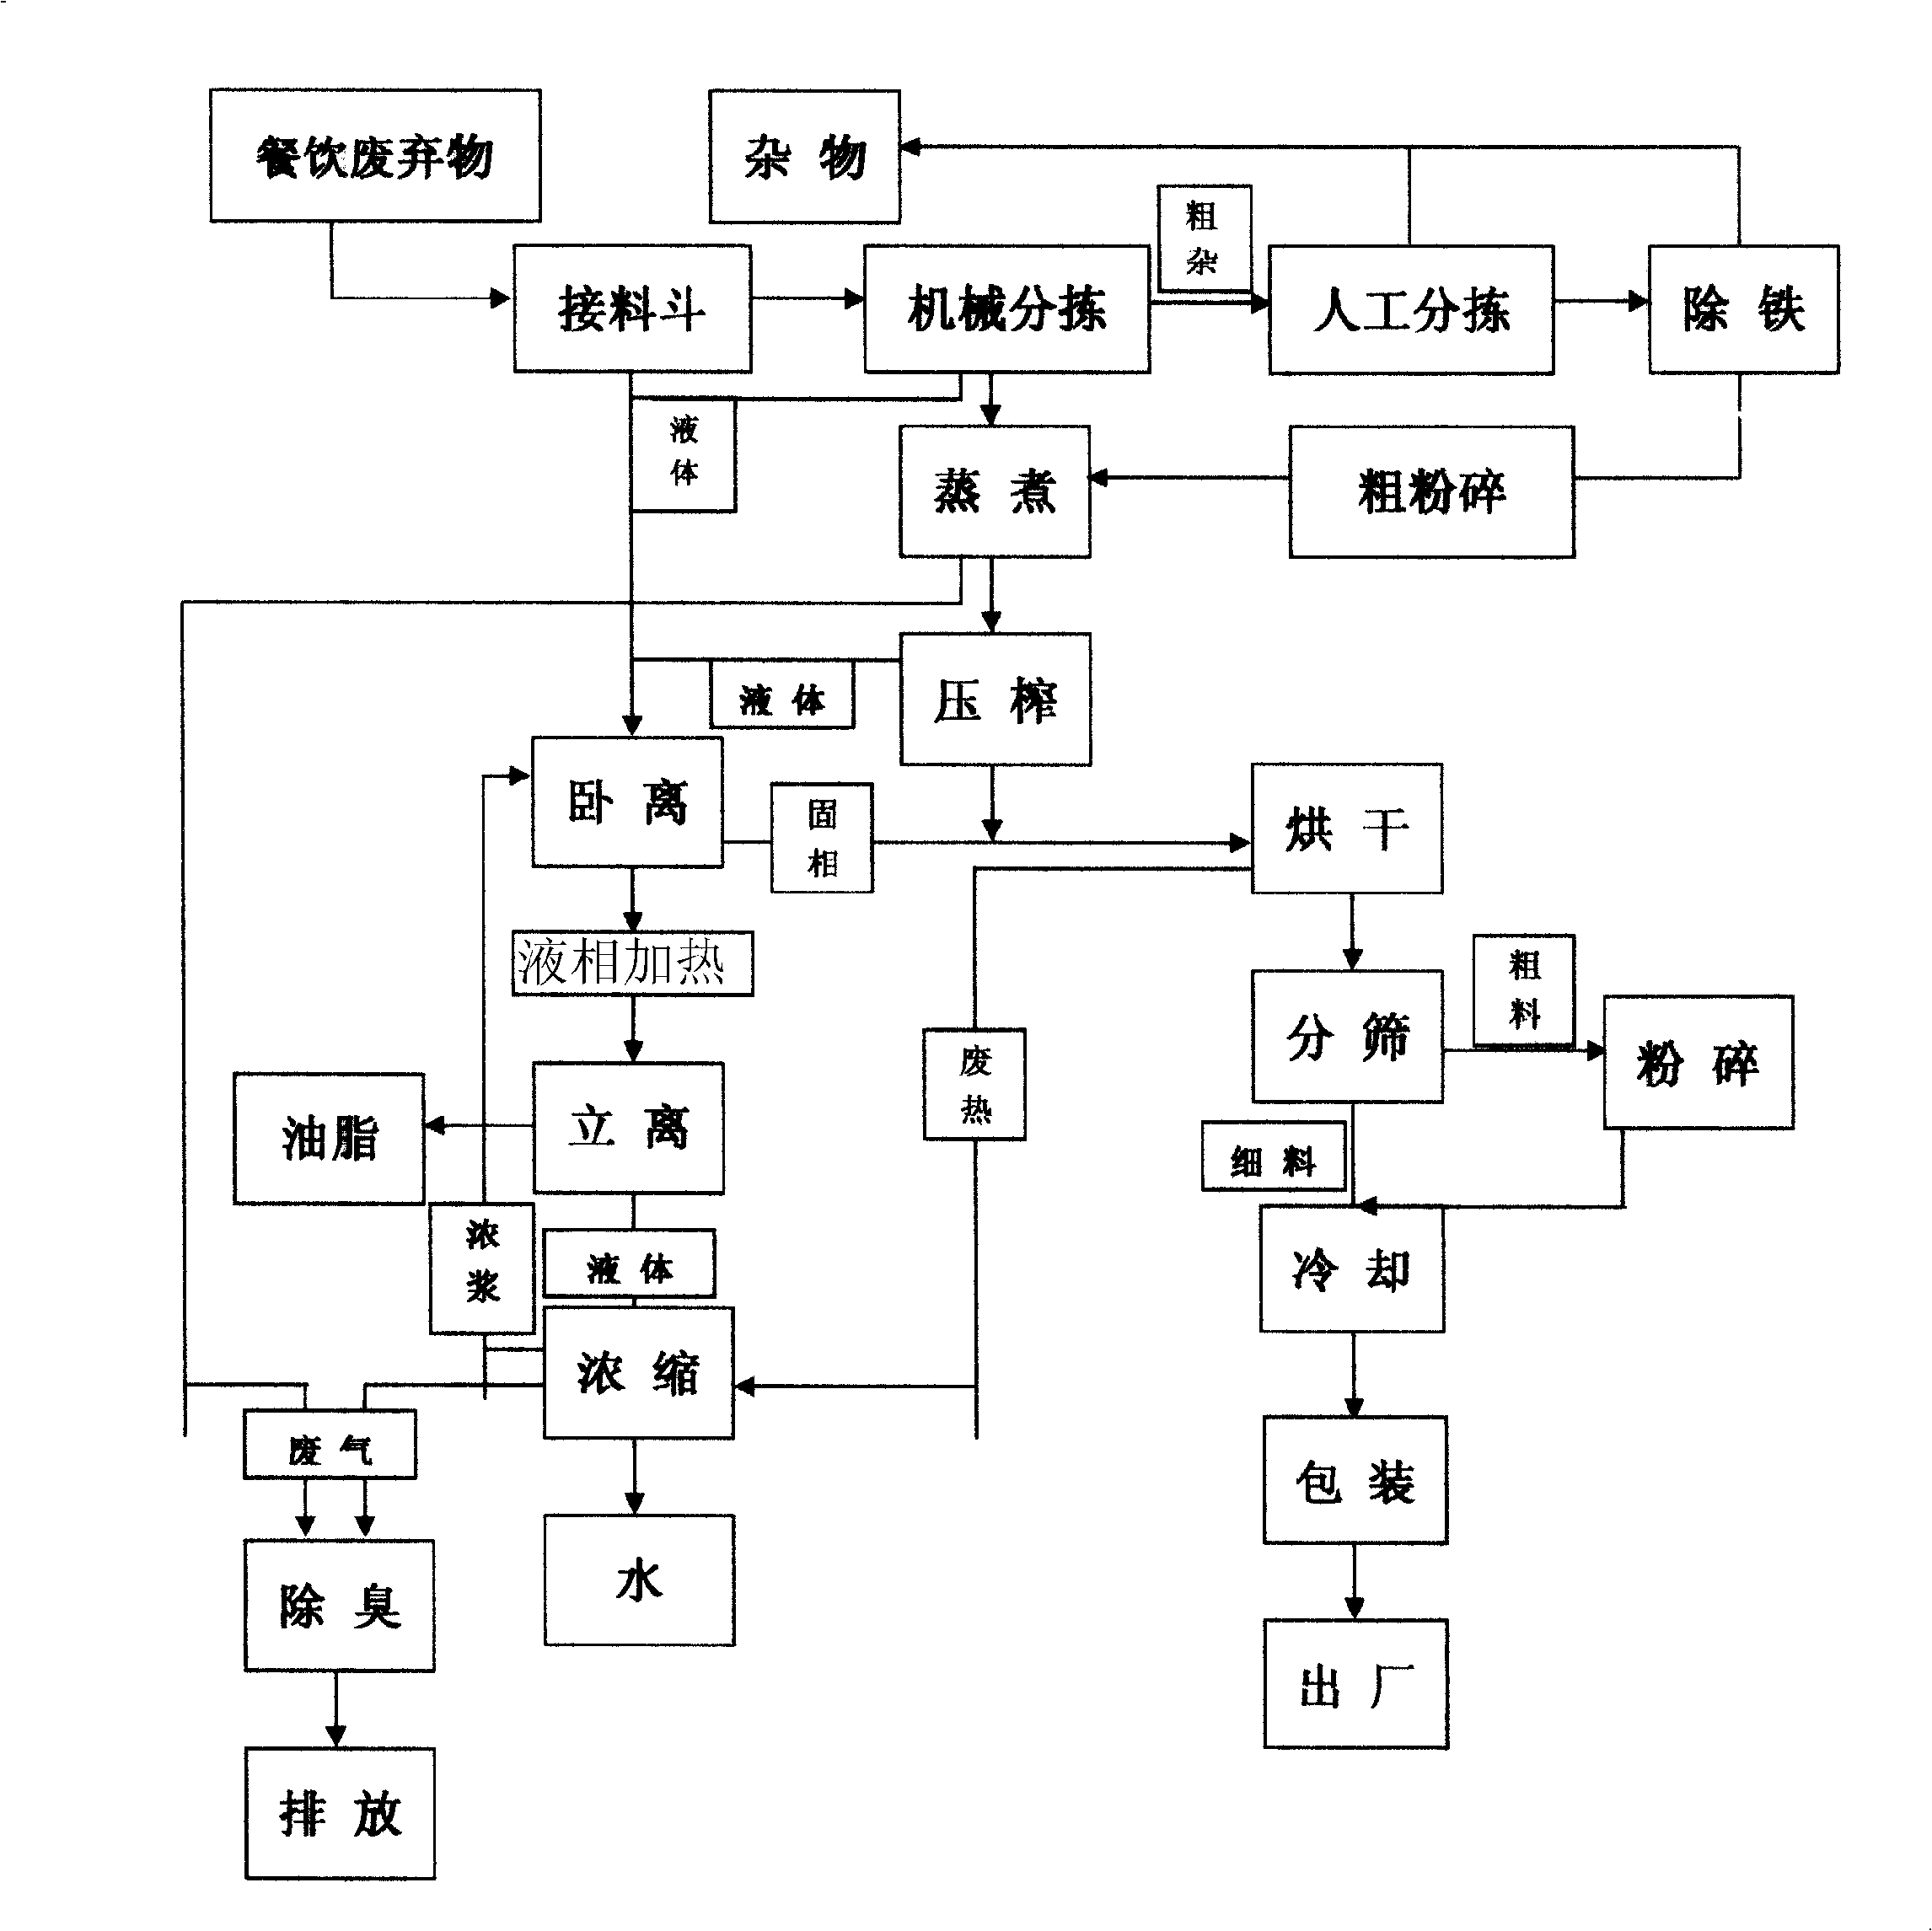 Processing method for castoff of food and drink